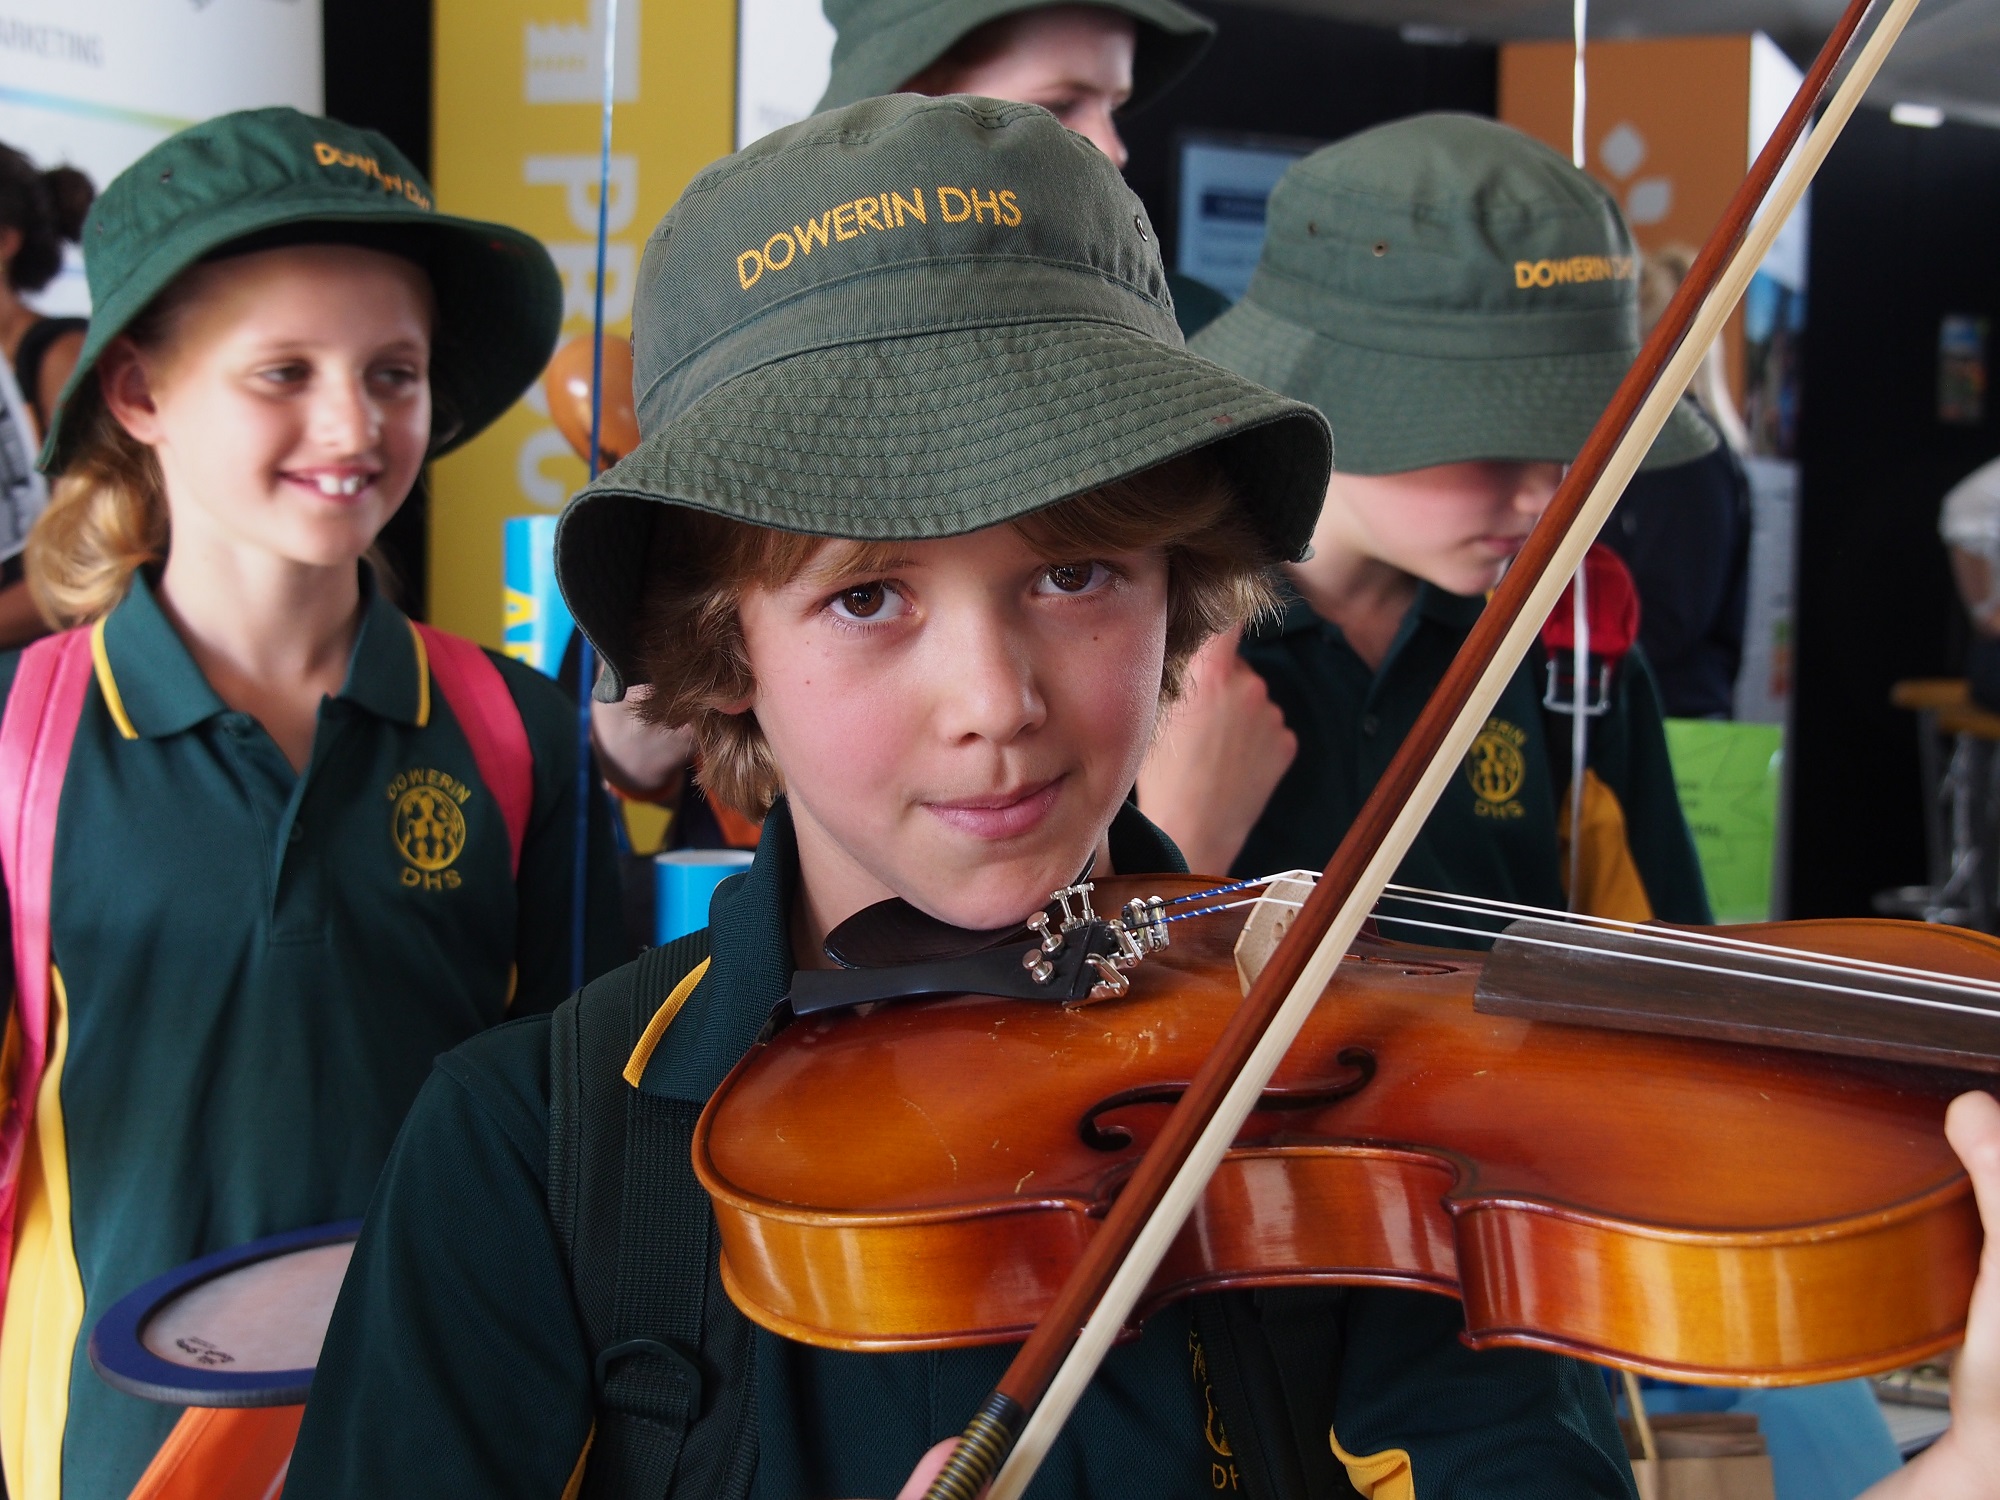 A young school boy wearing a green hat plays the violin